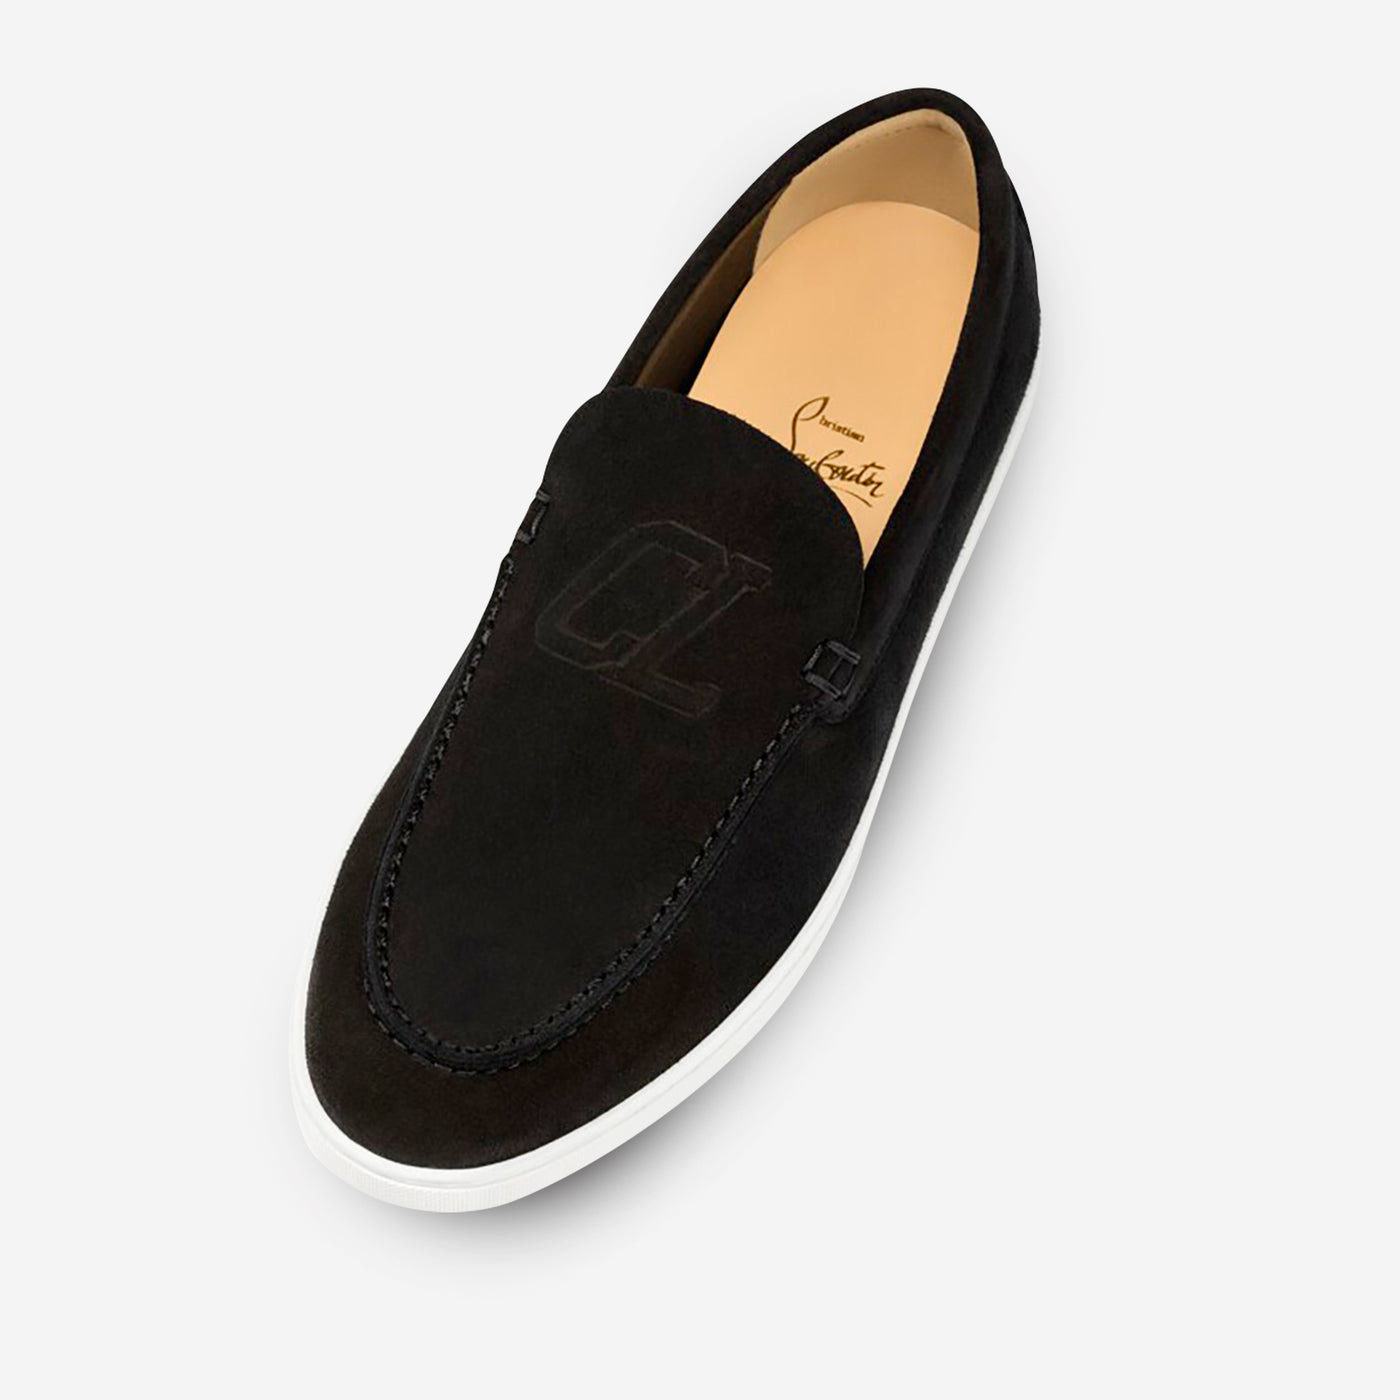 Christian Lauboutin Varsiboat Suede Leather Loafers